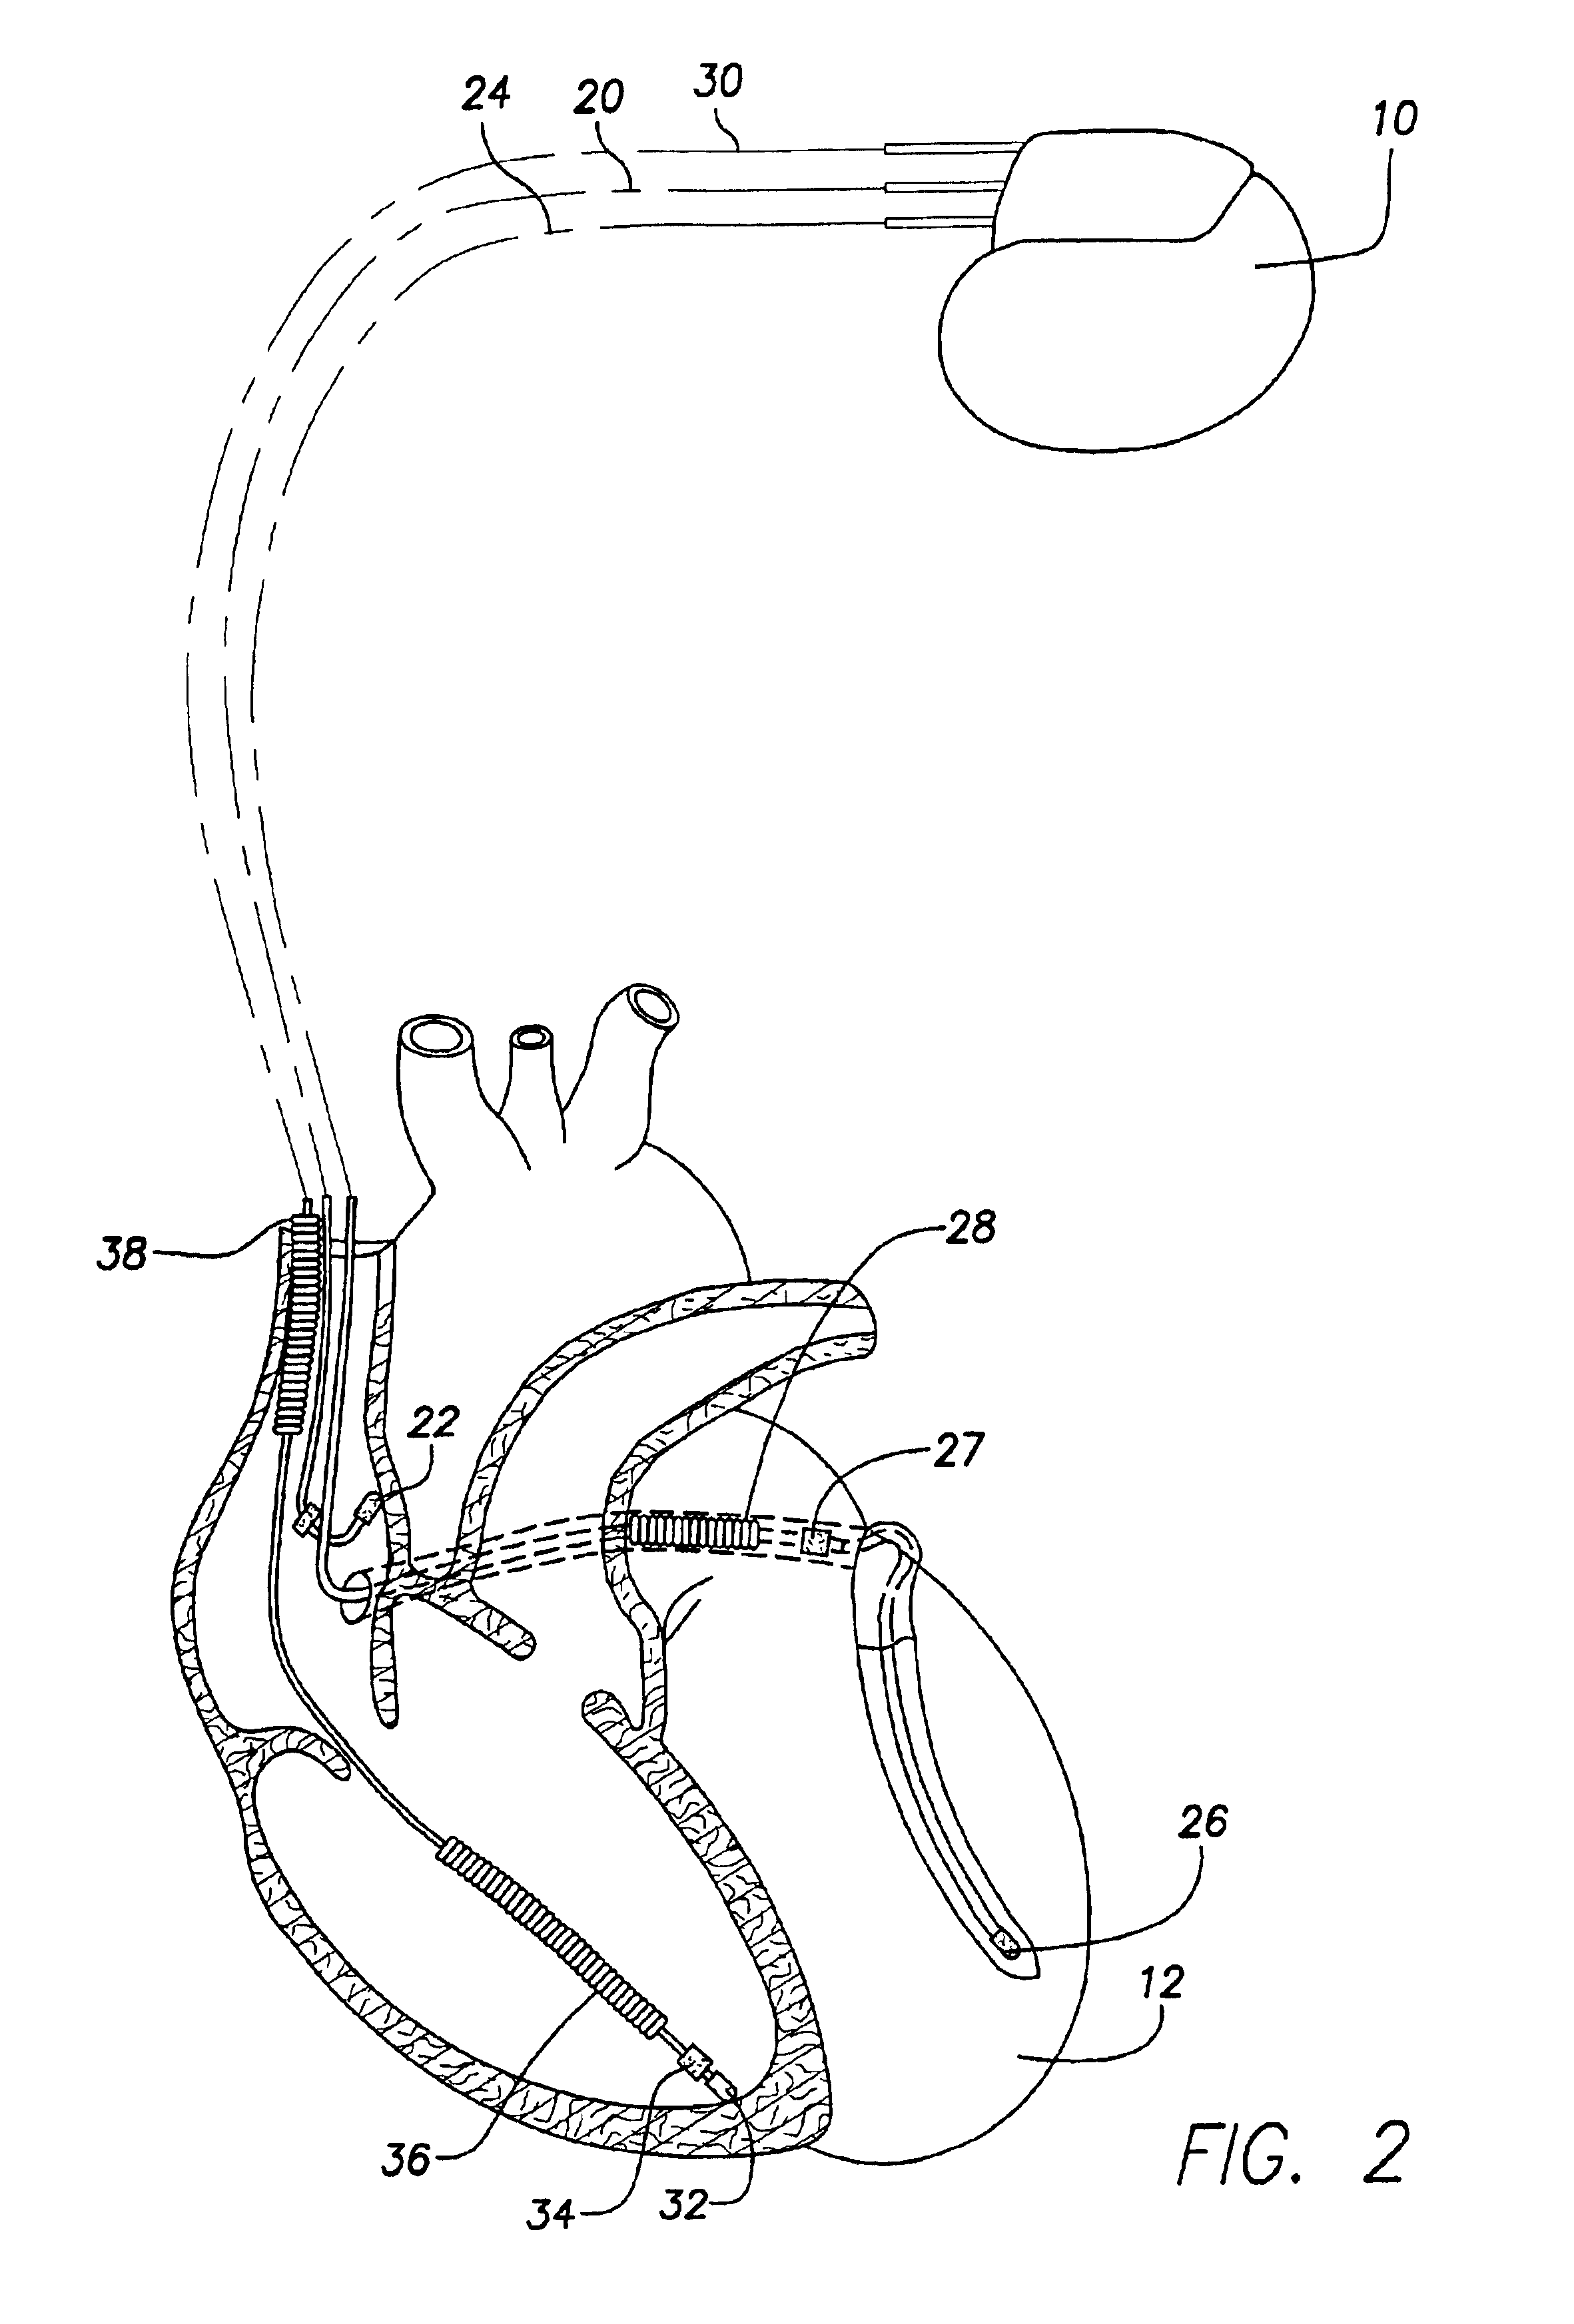 Method and apparatus for dynamically adjusting overdrive pacing parameters